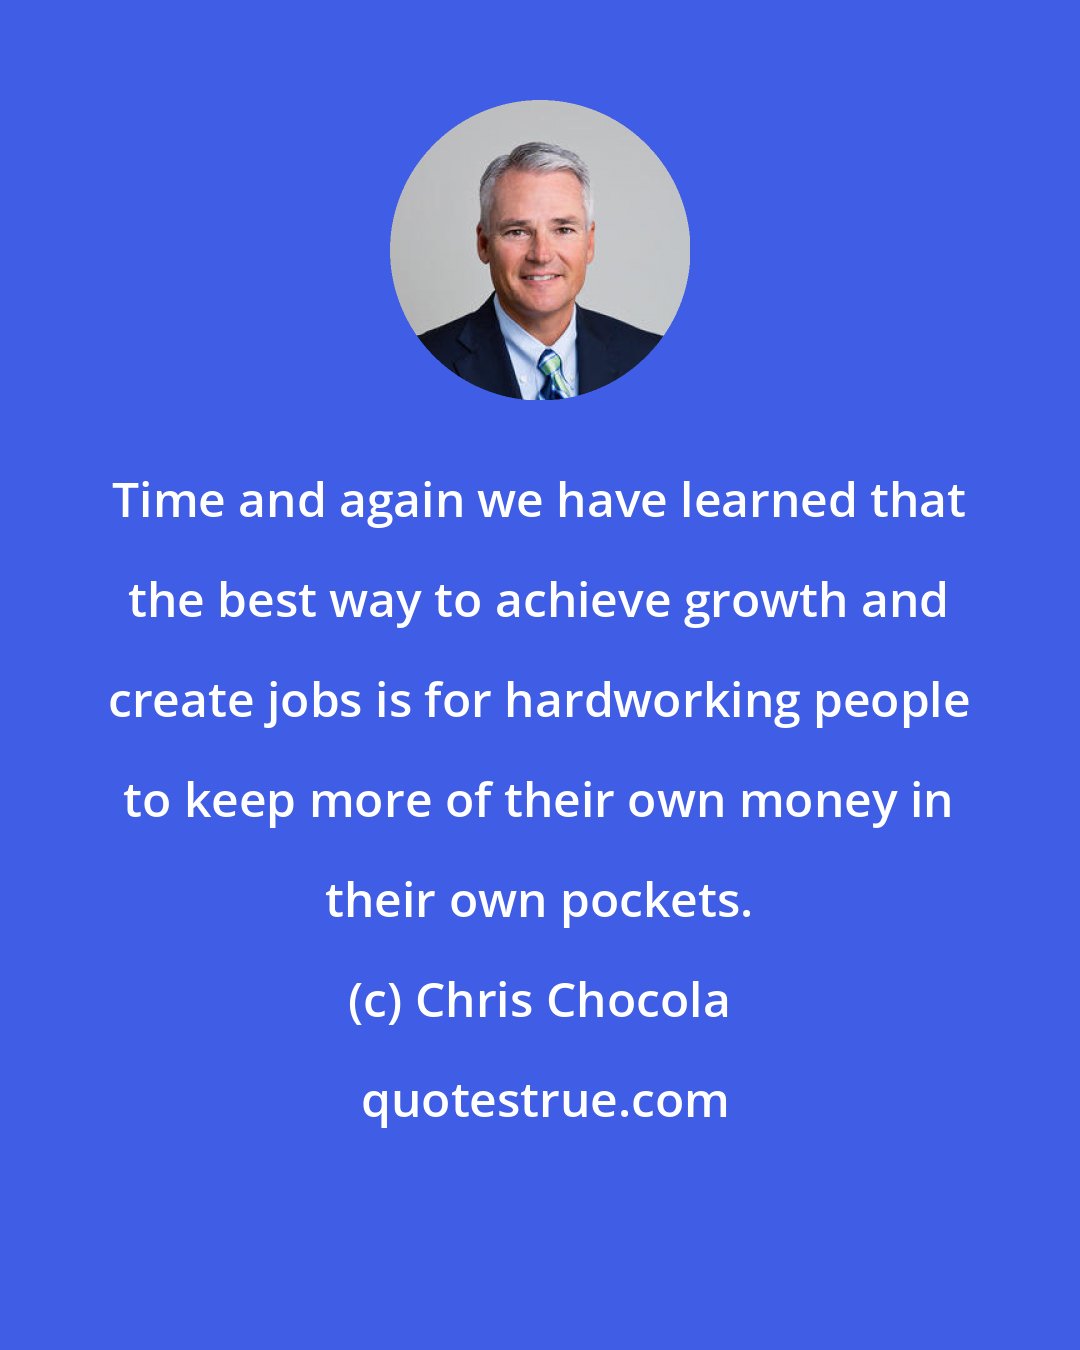 Chris Chocola: Time and again we have learned that the best way to achieve growth and create jobs is for hardworking people to keep more of their own money in their own pockets.